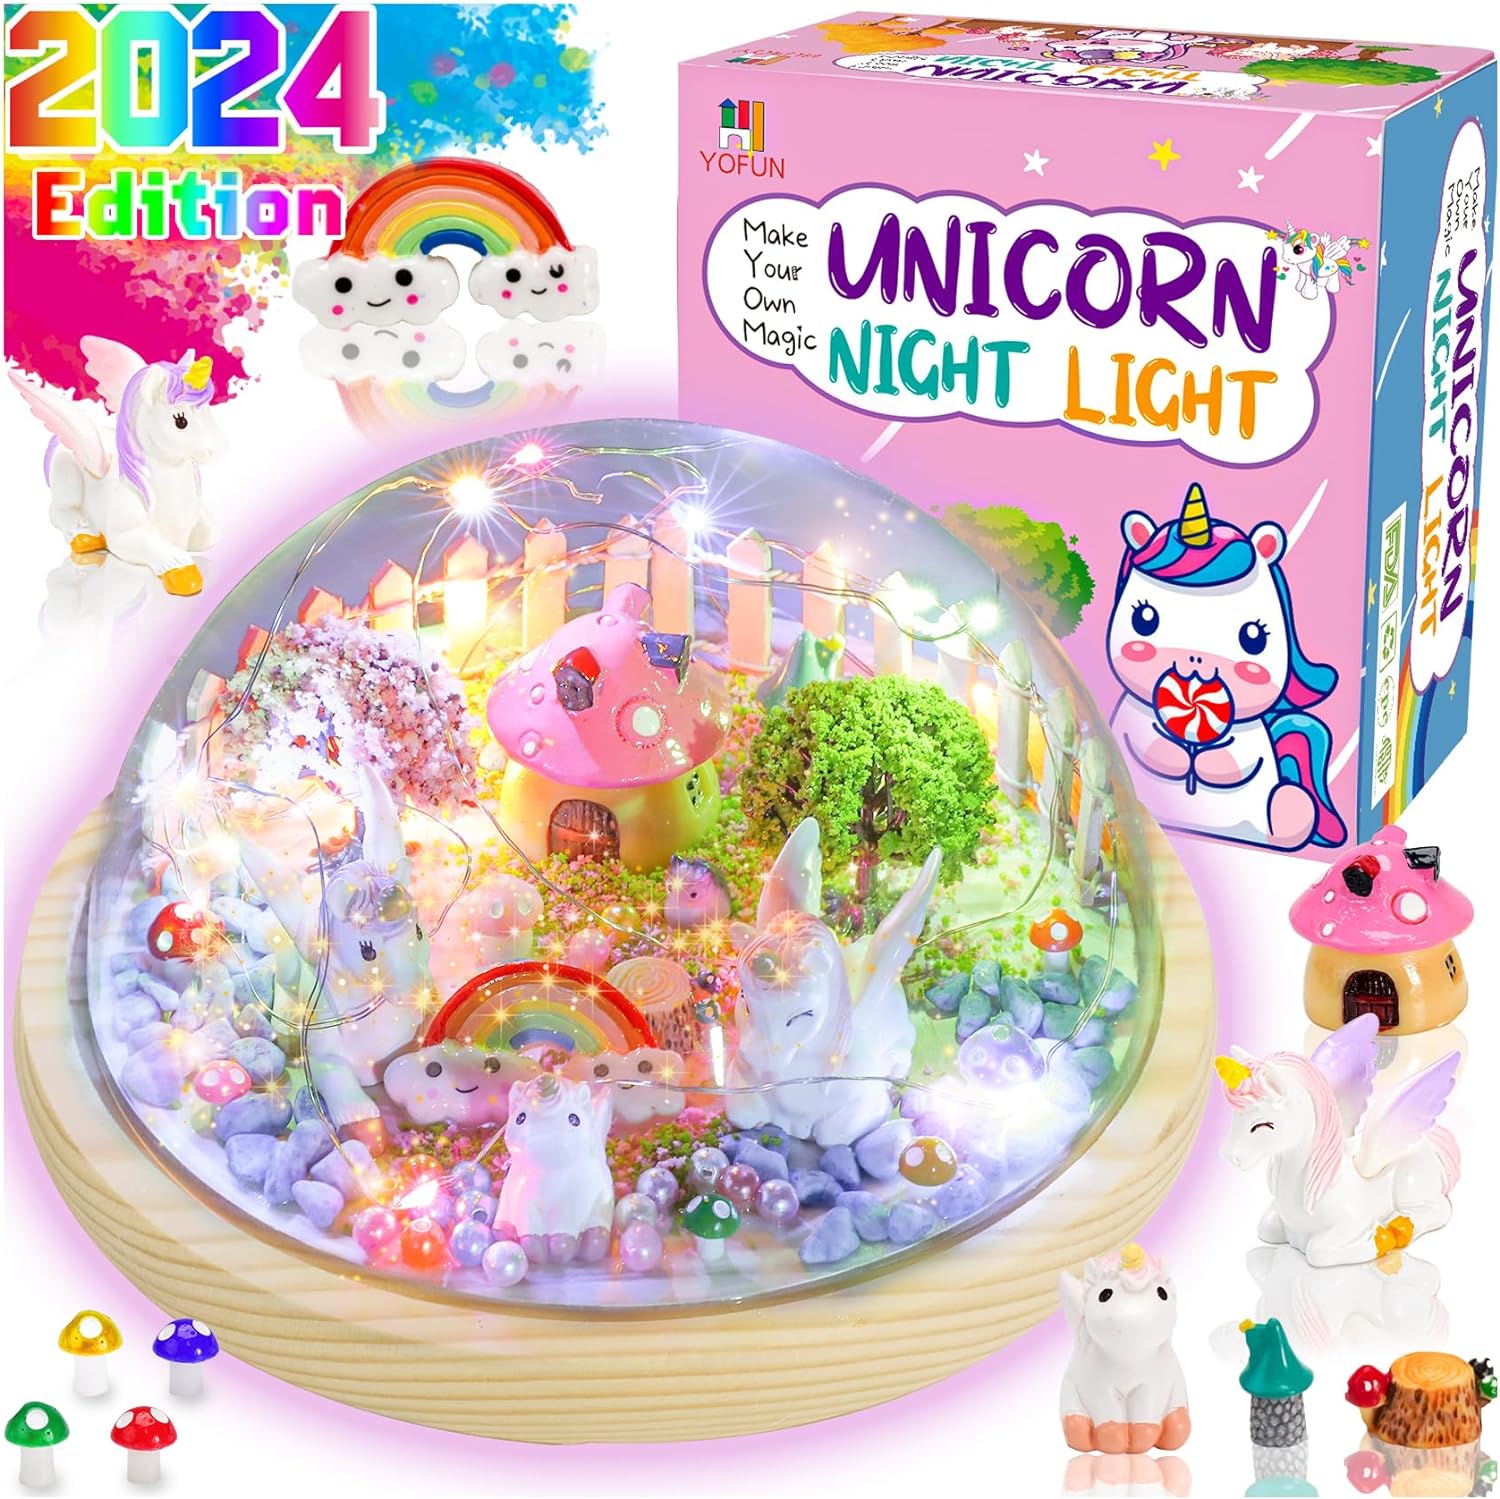 AOKESI Unicorns Gifts for Girls - Unicorn Crafts for Kids,Make Your Unicorn Night Lights Kit with Rainbow Fairy Lights,Gifts for 5 6 7 8 9 Year Old Girls,Unicorn Toys for Girl, Bedroom Decor